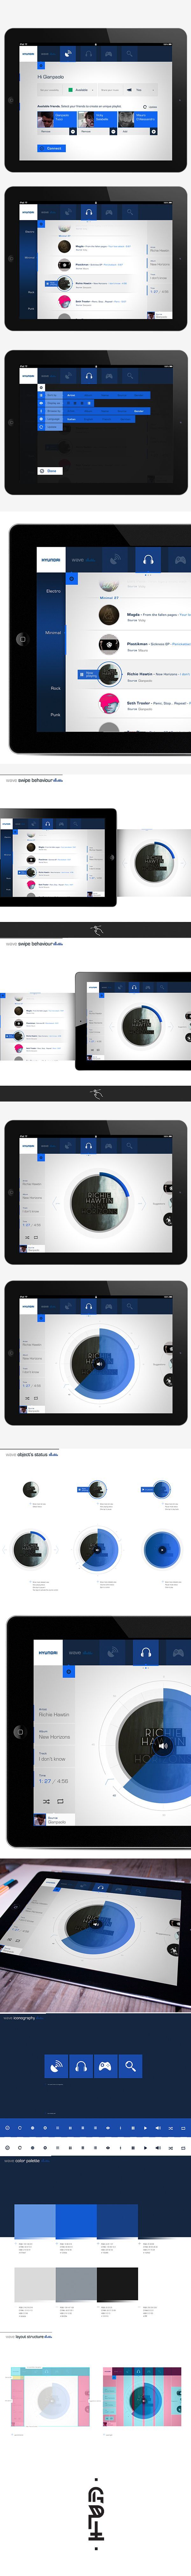 wave ||||  iPad application by Gianpaolo Tucci